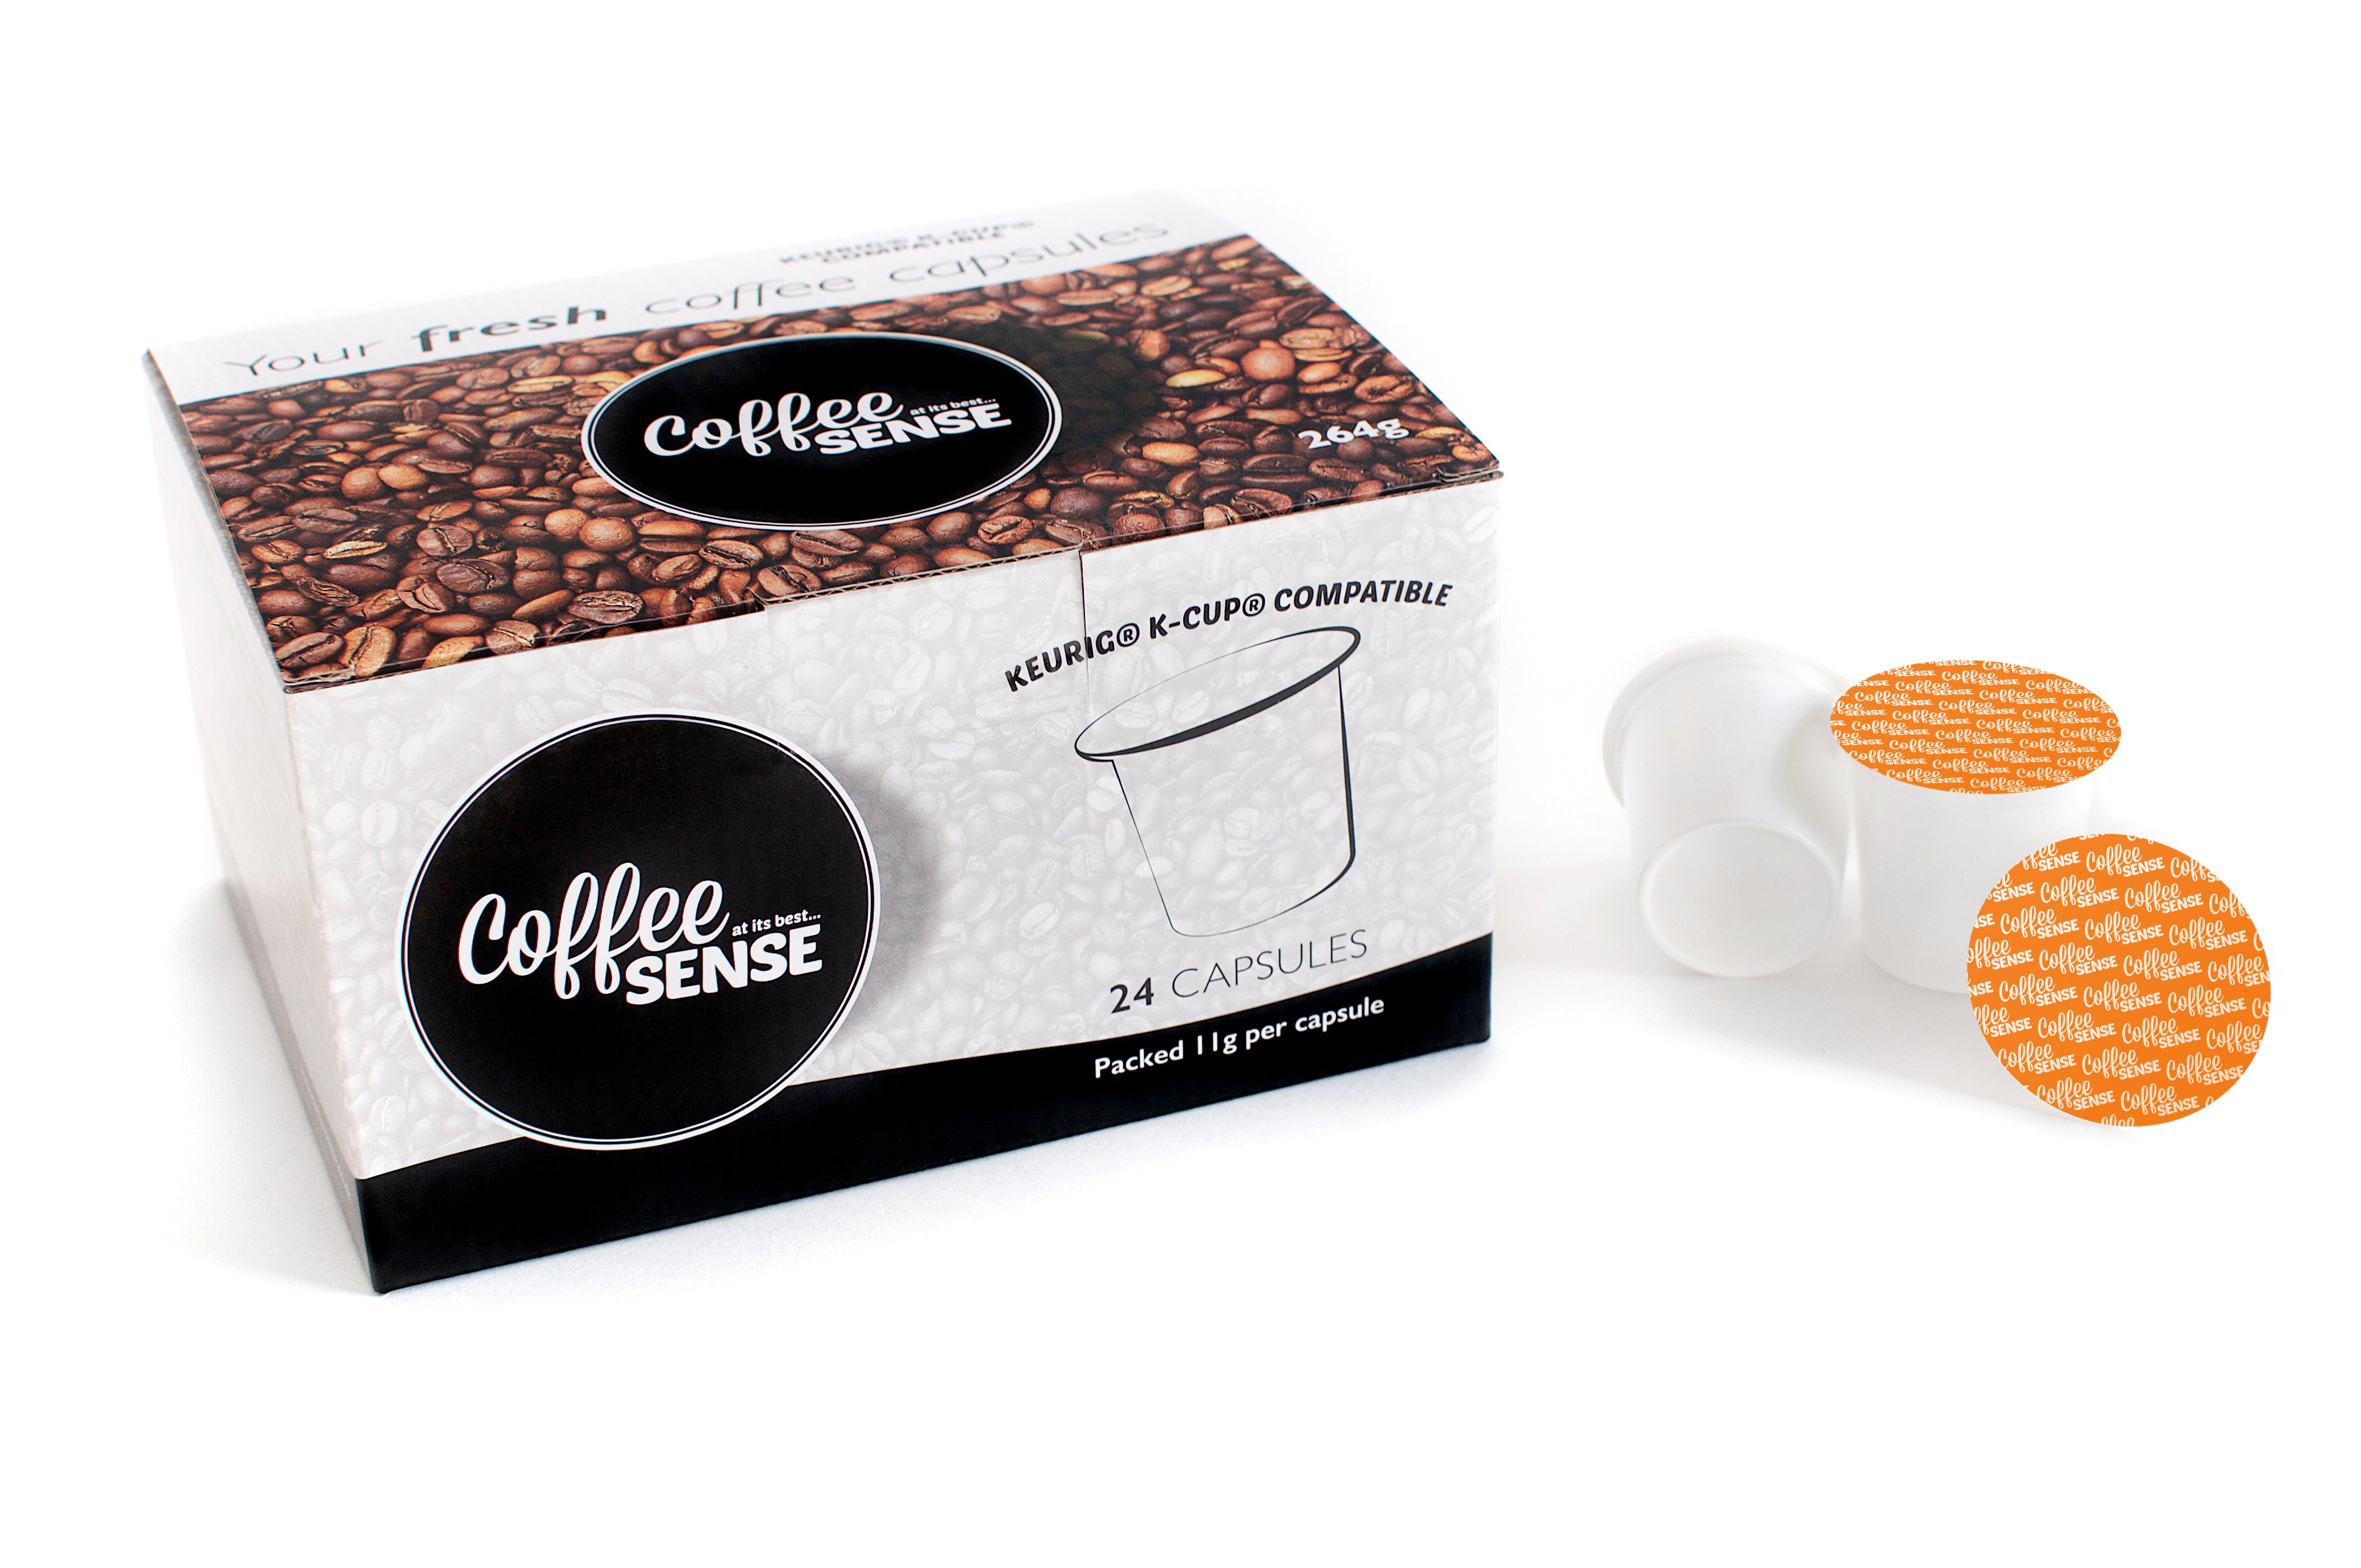 Keurig K-Cup compatible Coffee Pods by Subscription, Somerset Roast Box of 24 Pods